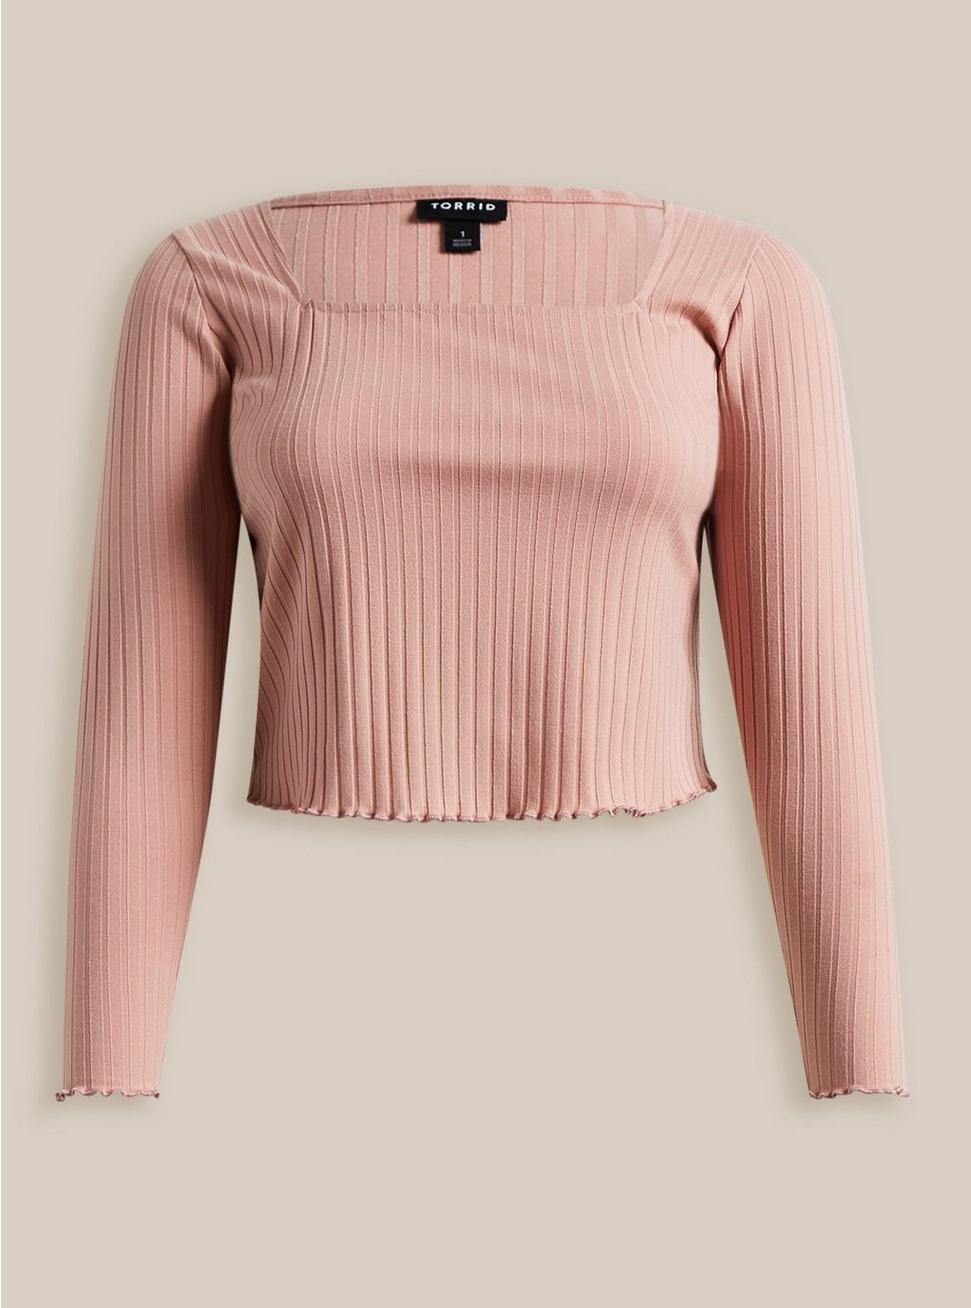 Knit Rib Square Neck Long Sleeve Tee, DUSTY PINK, hi-res